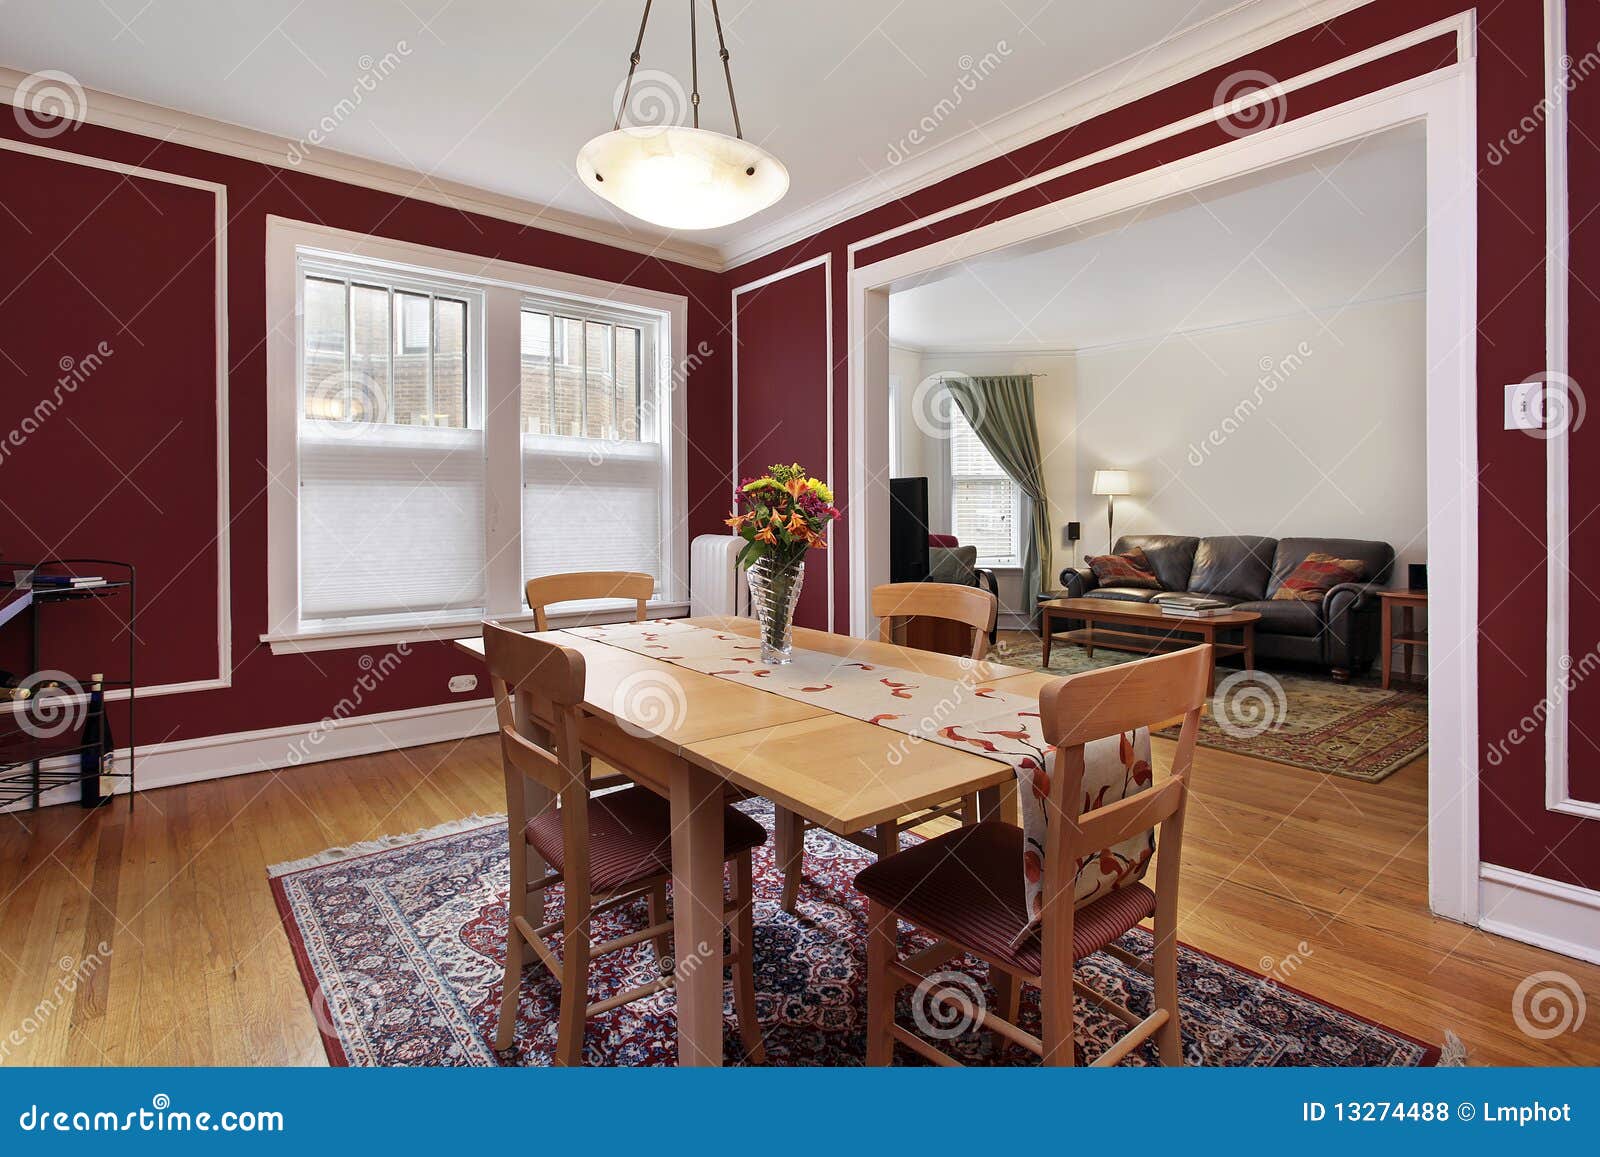 Dining room with red walls stock photo. Image of supper - 13274488